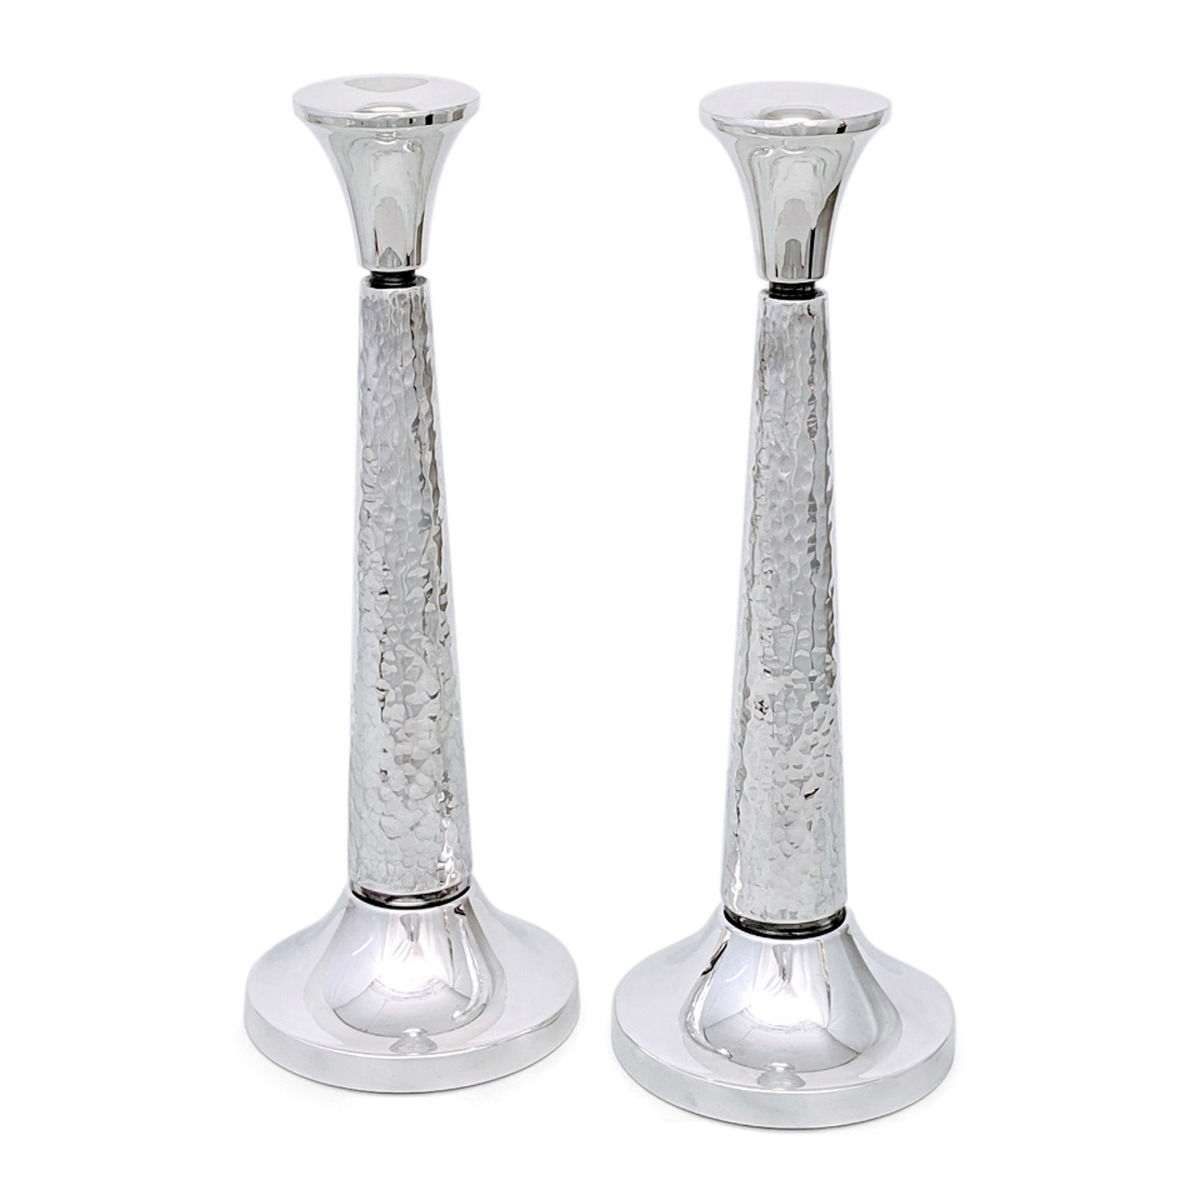 Bier Judaica 925 Sterling Silver Handcrafted Shabbat Candlesticks With Hammered Finish - 1